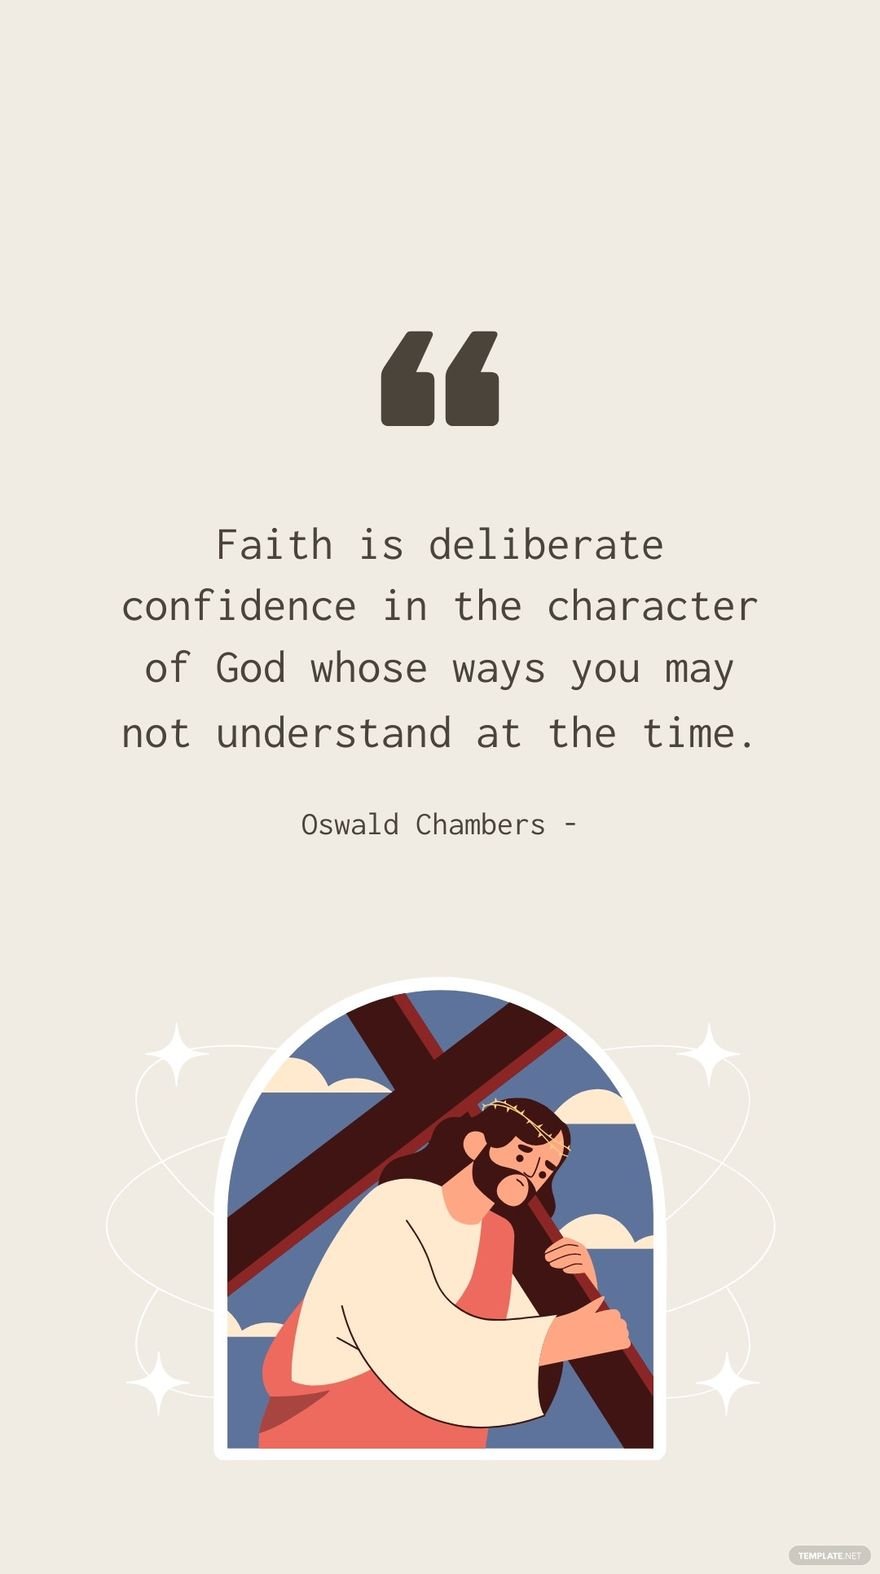 Oswald Chambers - Faith is deliberate confidence in the character of God whose ways you may not understand at the time.